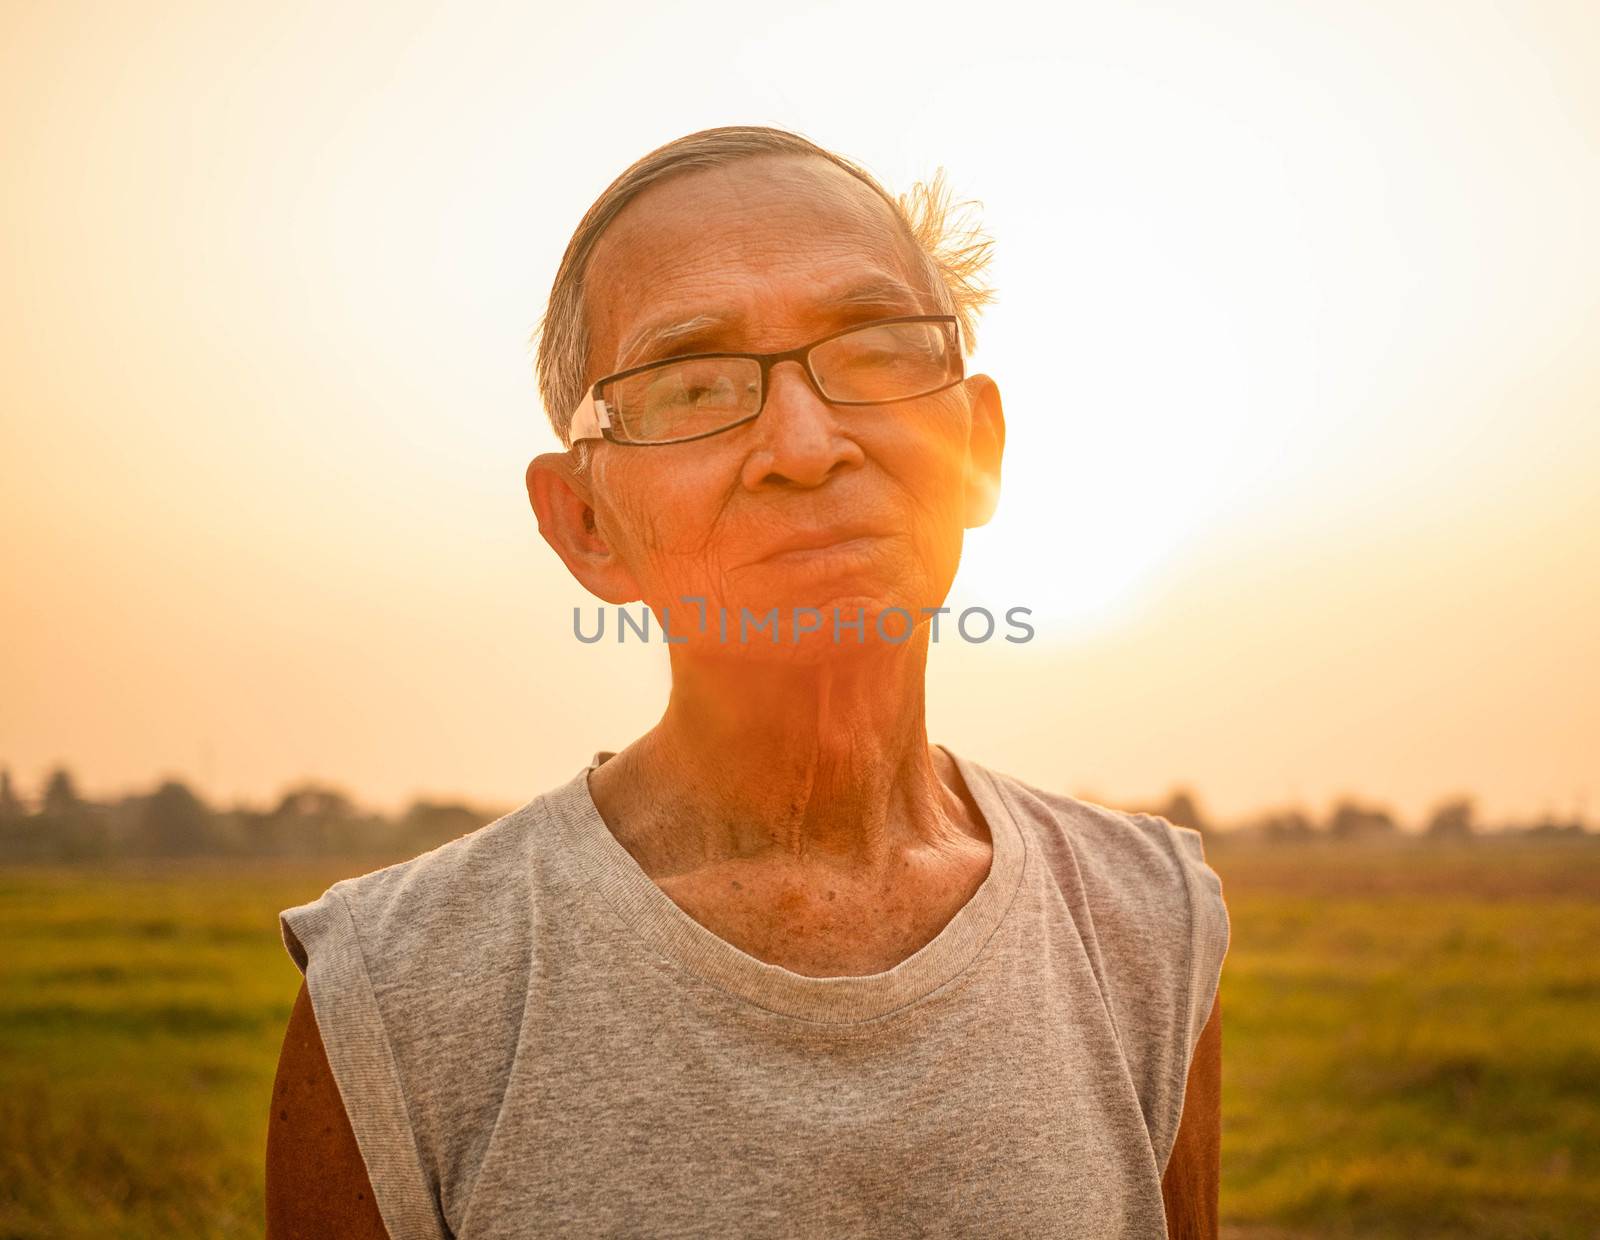 Asian senior man jogging on a sunset background over a field in countryside. Healthcare concept.